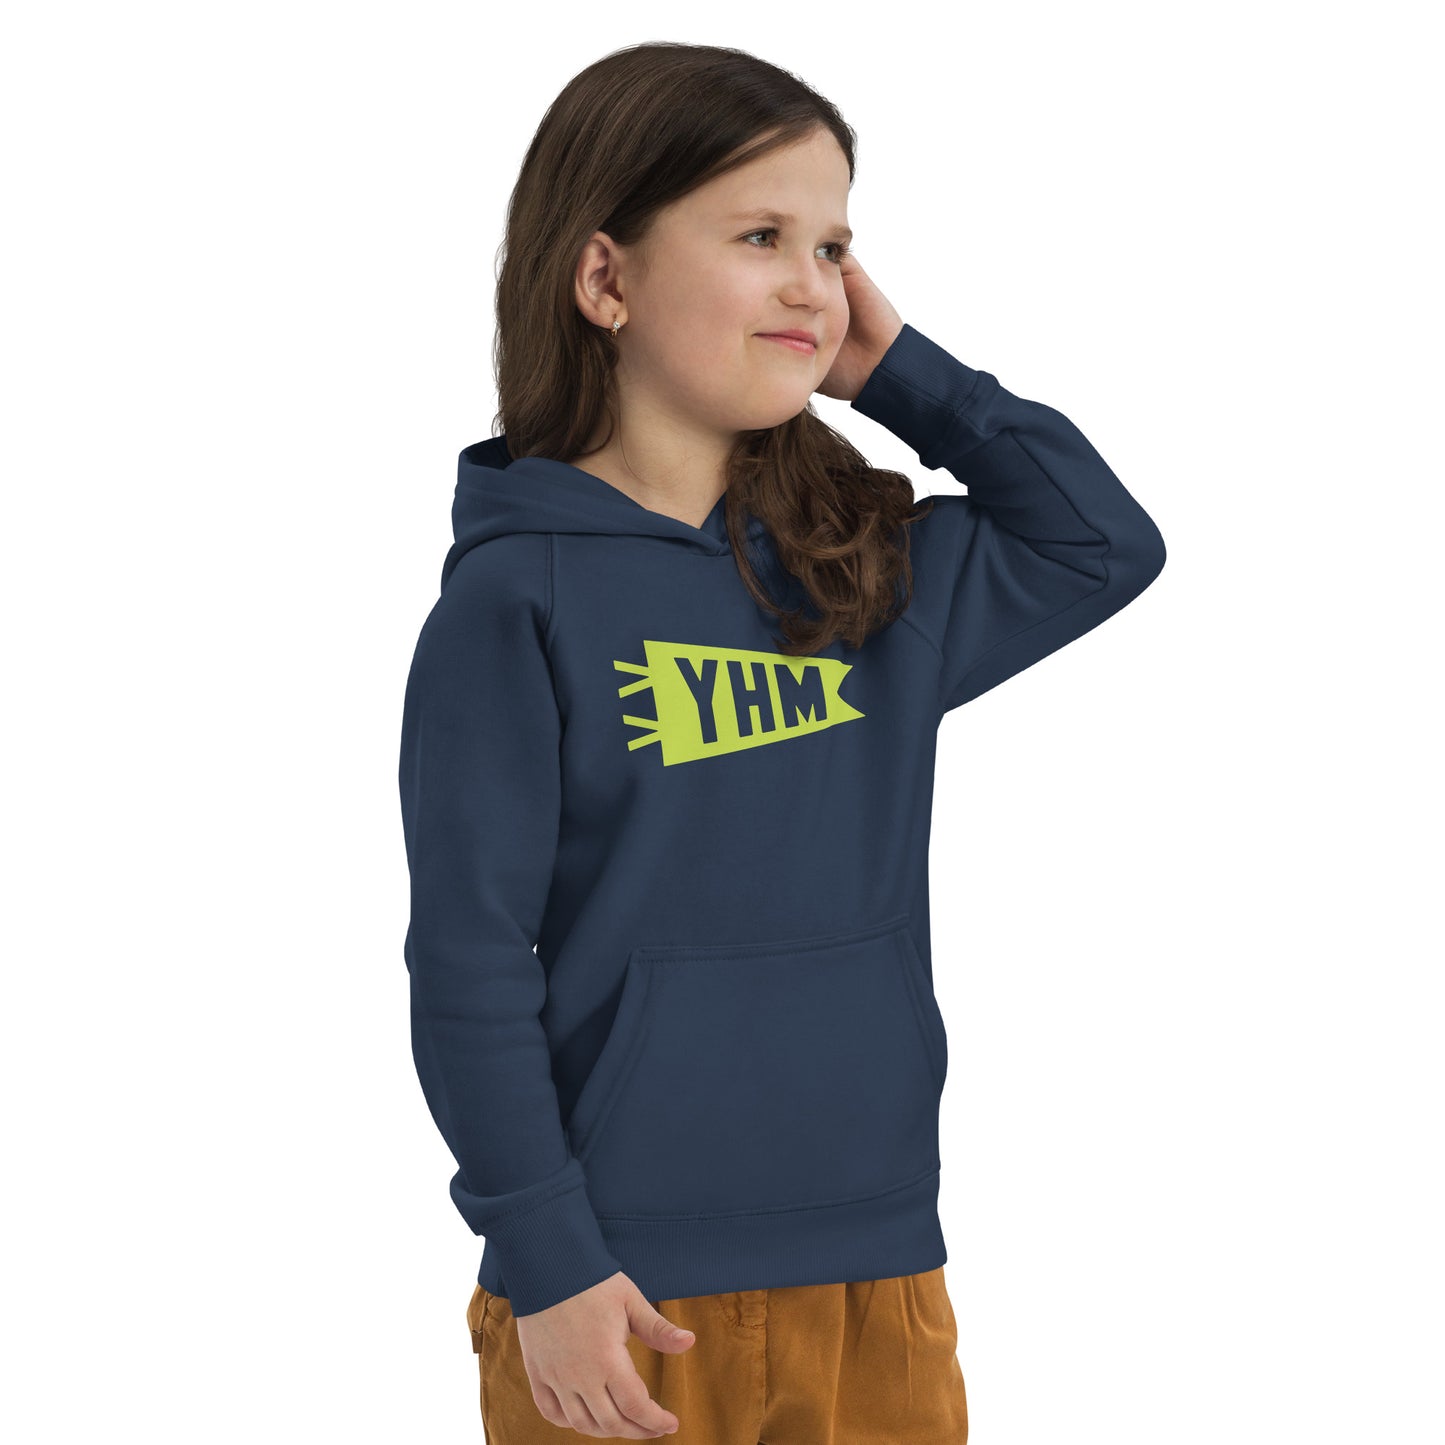 Kid's Sustainable Hoodie - Green Graphic • YHM Hamilton • YHM Designs - Image 06